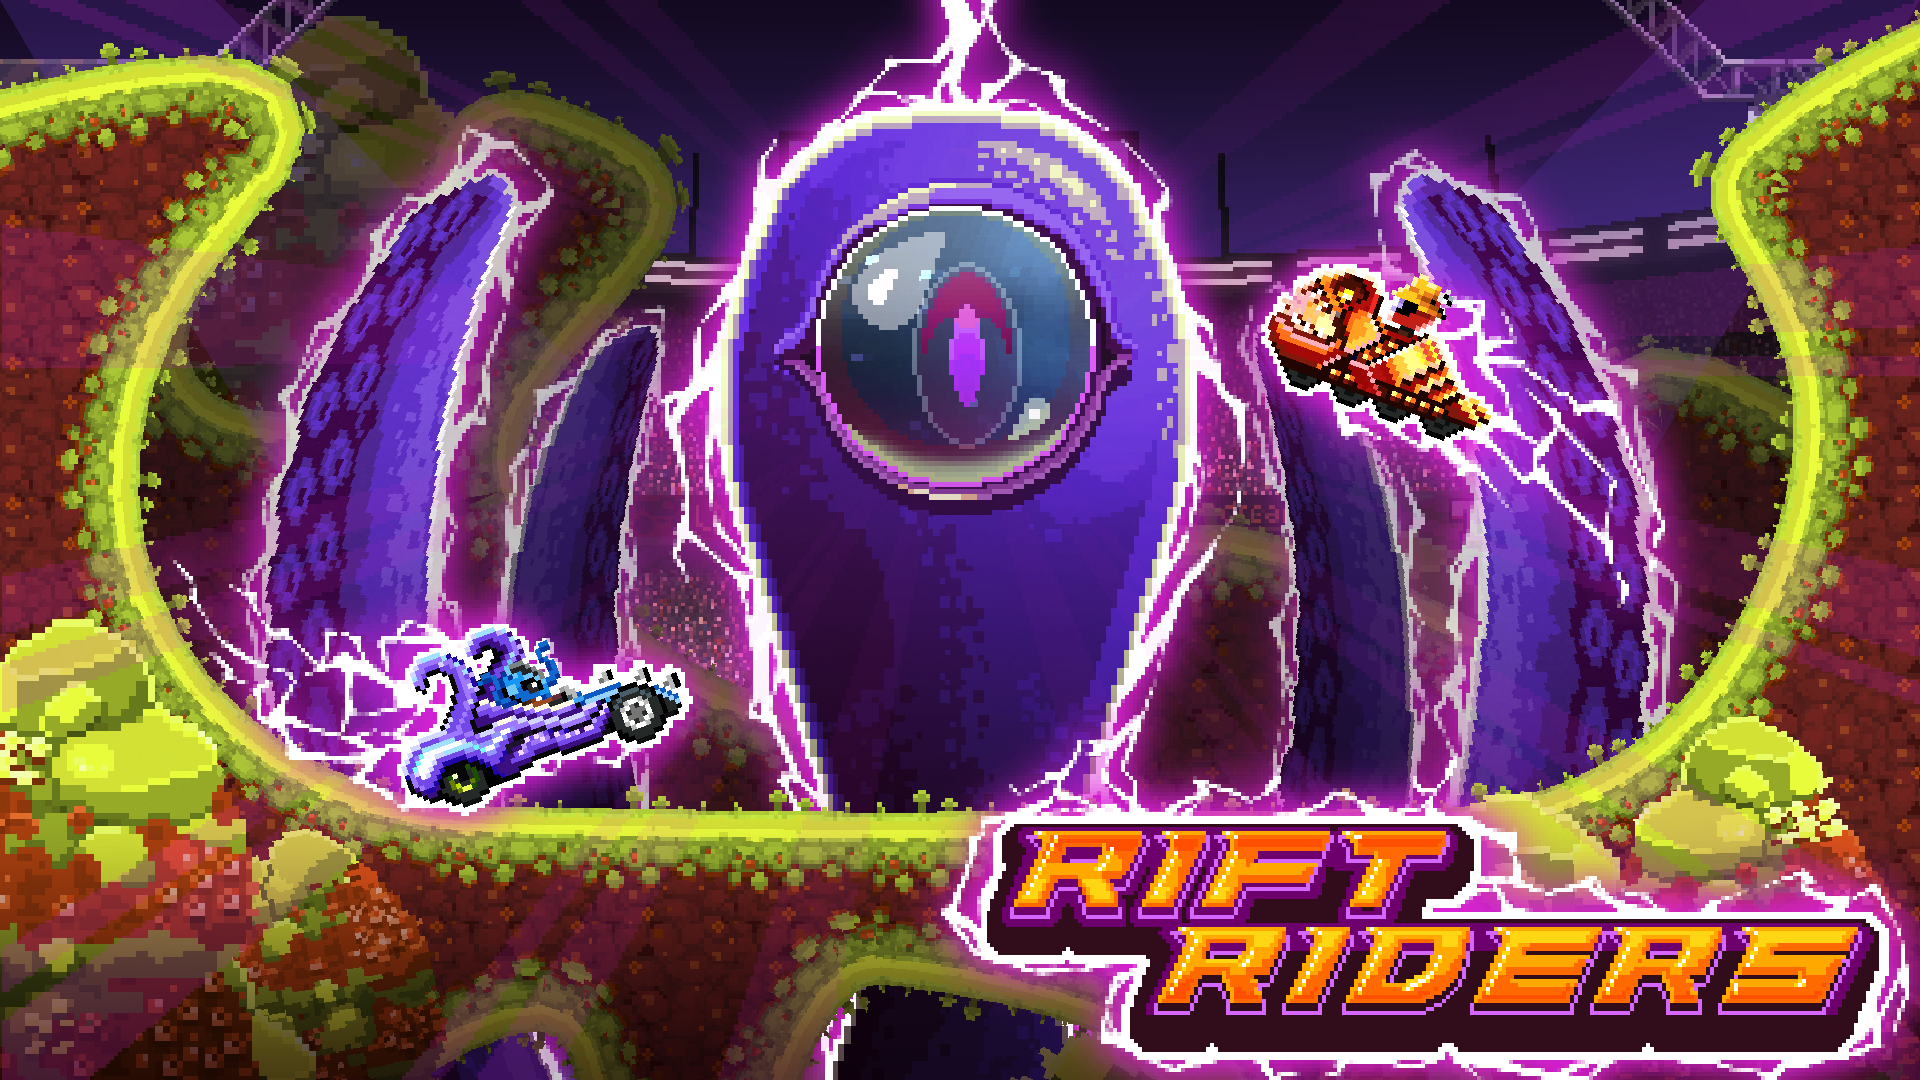 Free Download Drive Ahead Rift Riders Album On Imgur 1920x1080 For Your Desktop Mobile 